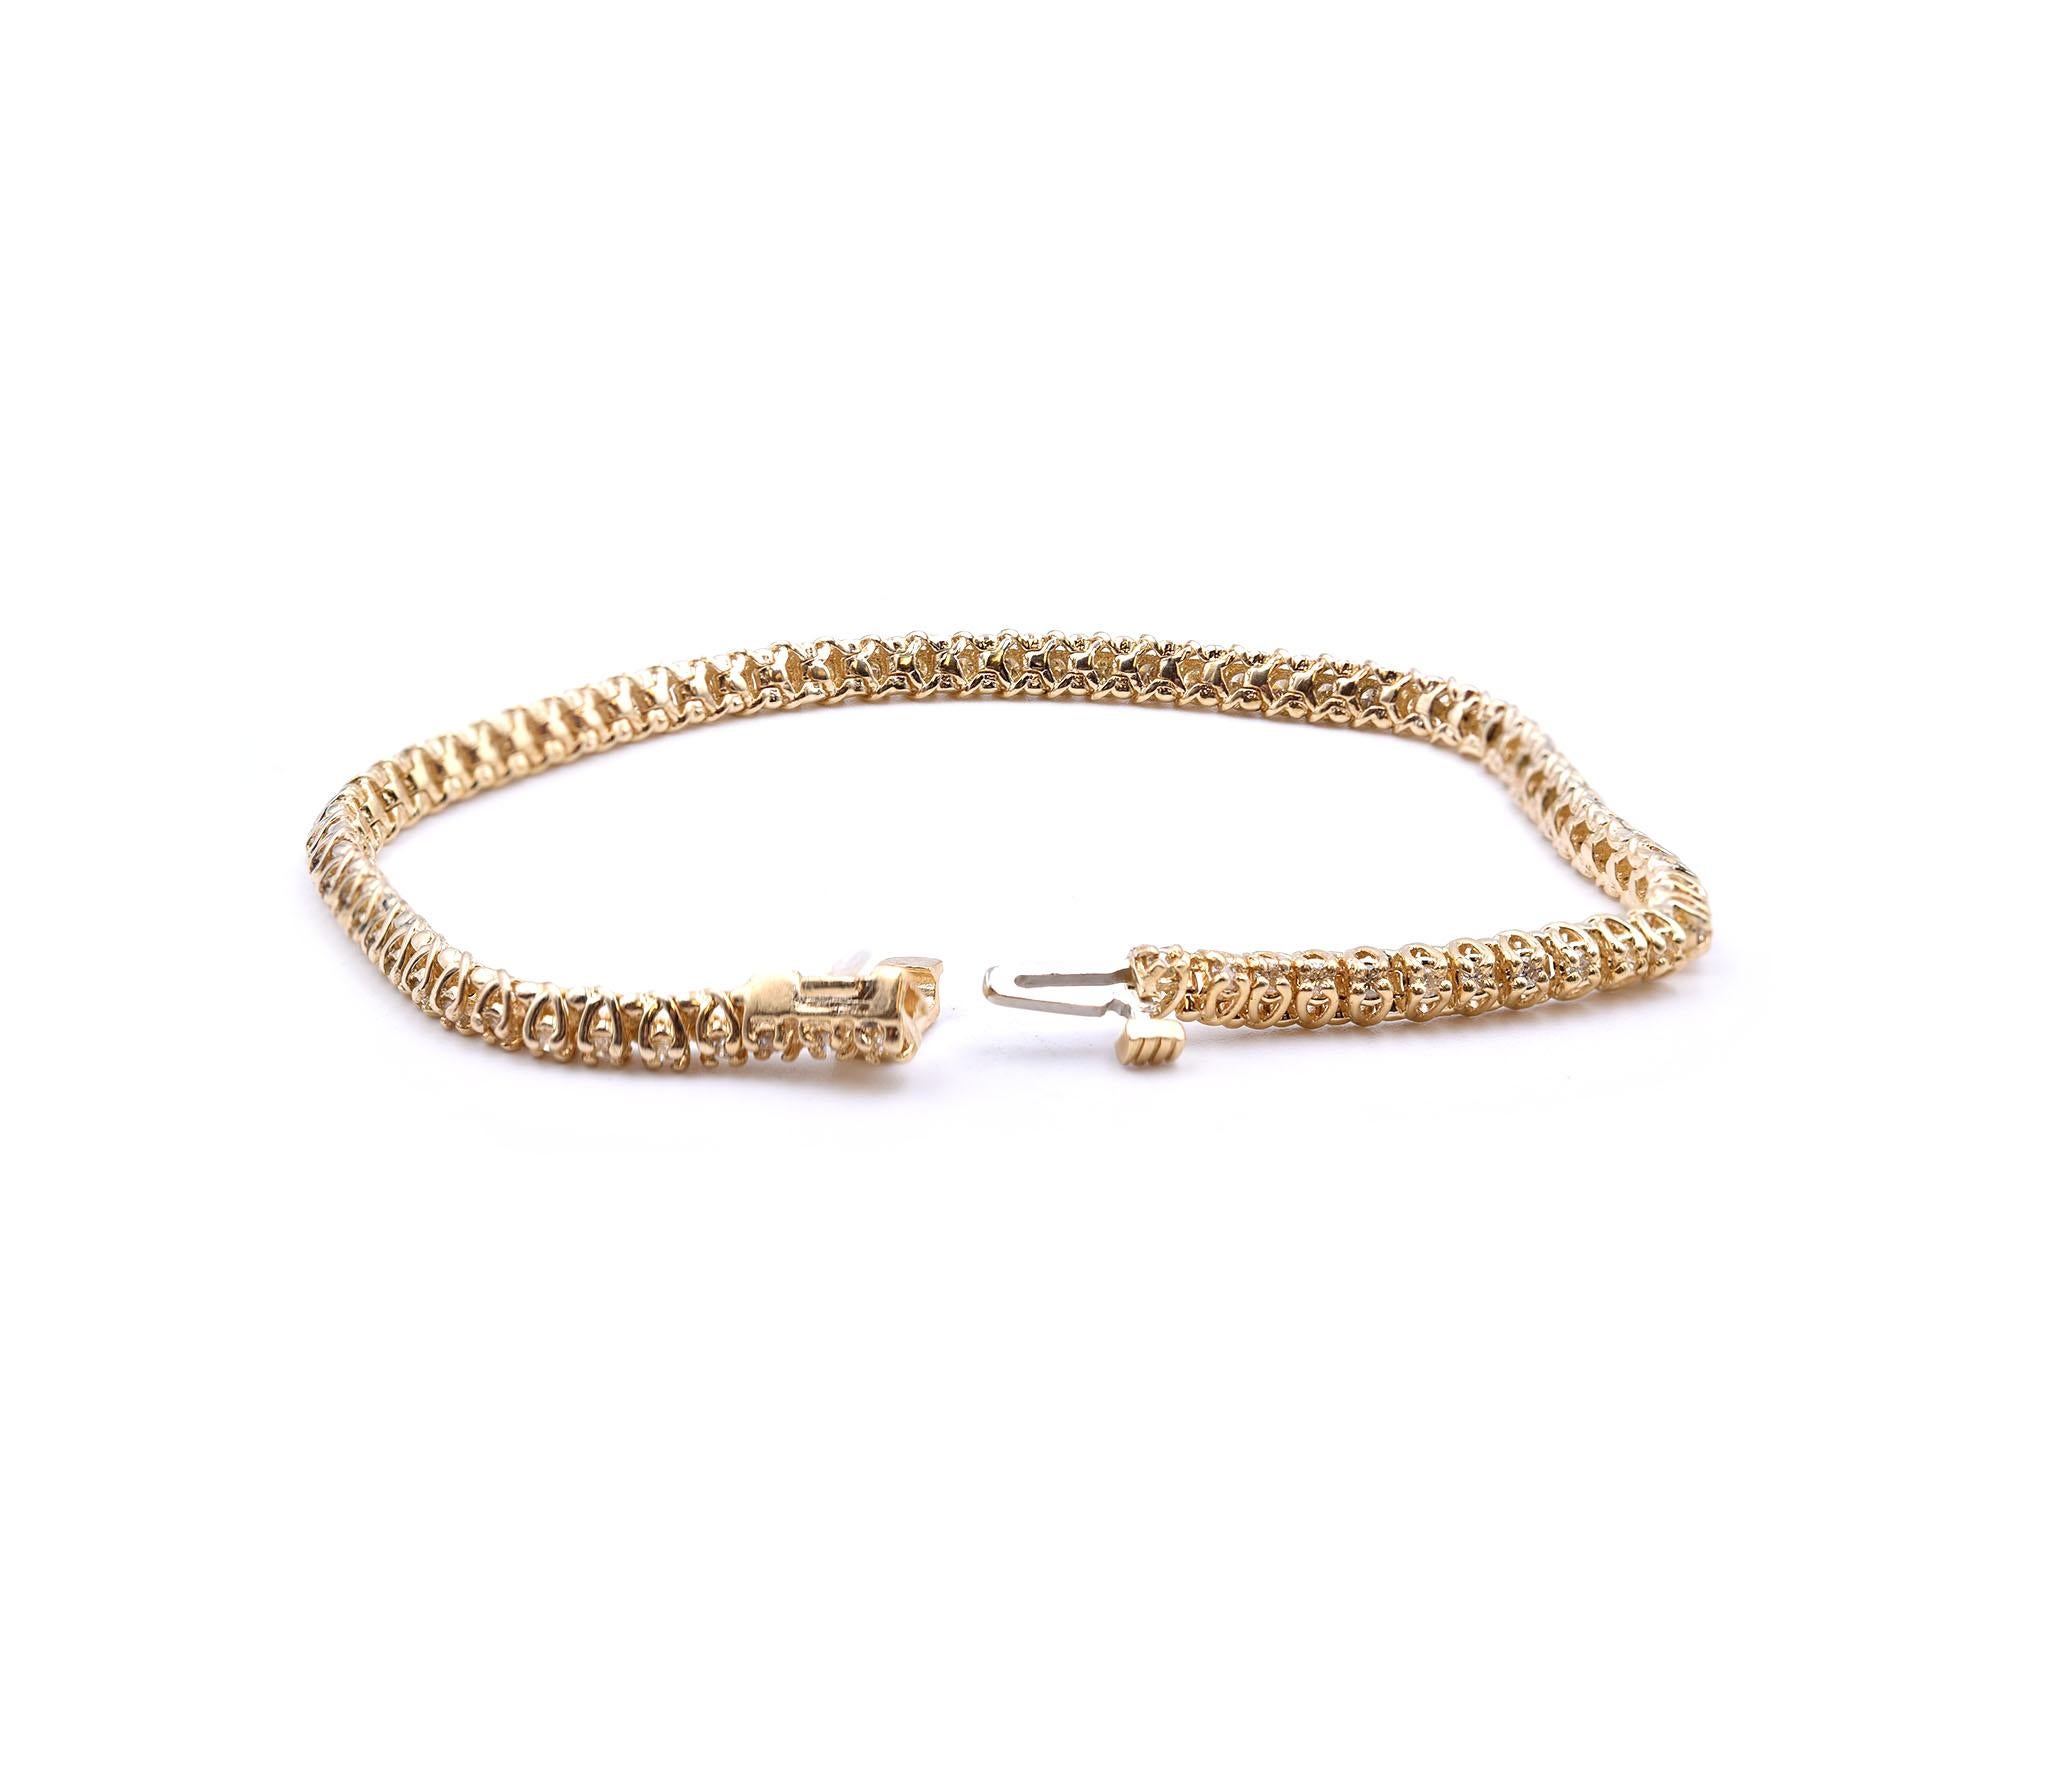 Designer: custom
Material: 14k yellow gold
Diamonds: 70d = 1.02cttw
Color: G
Clarity: SI1
Dimensions: bracelet is 7 inches long and measures 3.64mm in width
Weight: 10.25 grams
